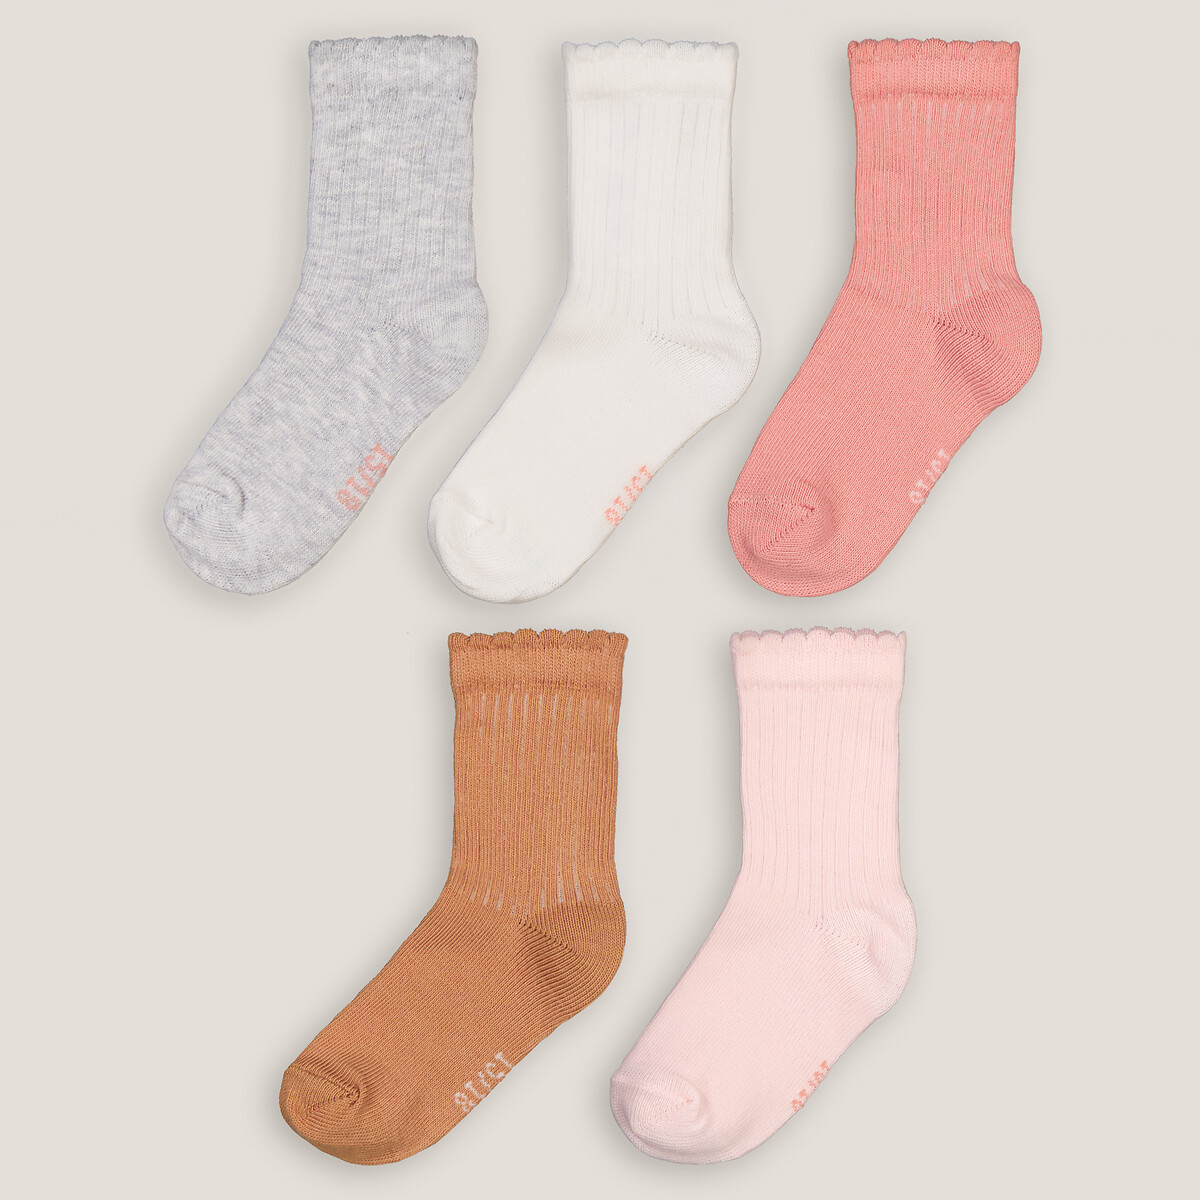 Pack of 5 Pairs of Socks in Plain Cotton Mix